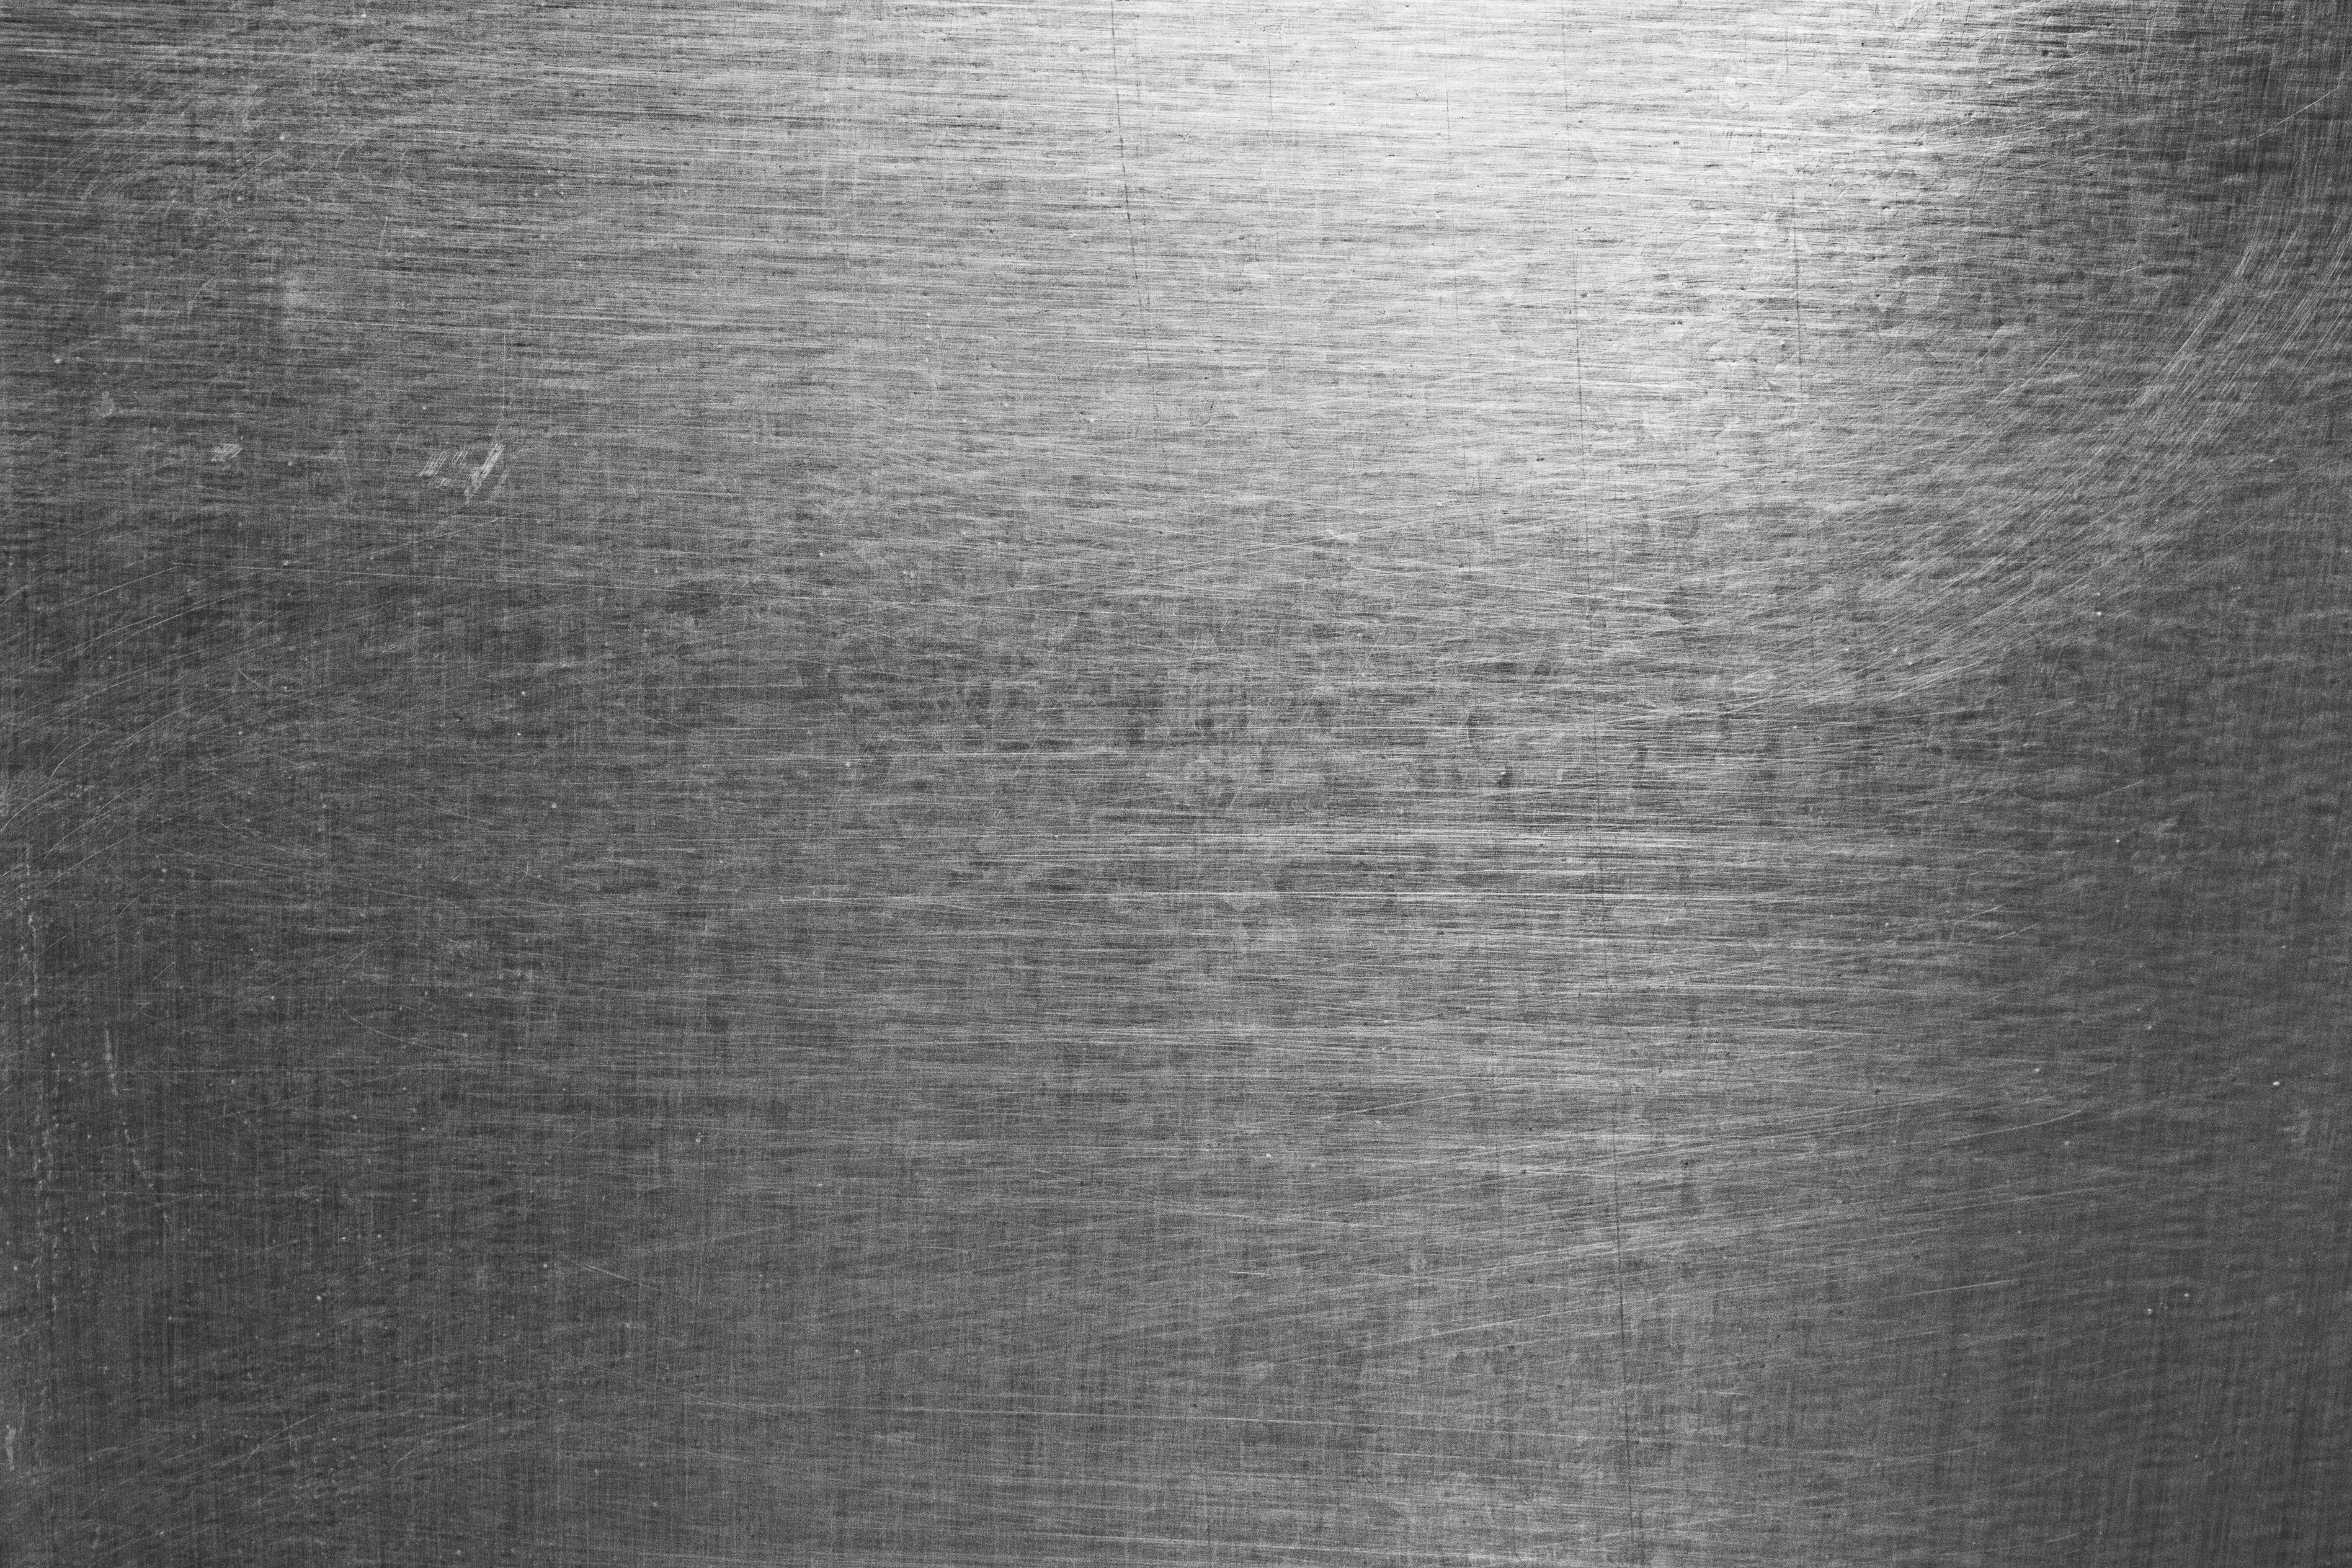 High Contrast Brushed Scratched Metal Sheet Wild Textures No